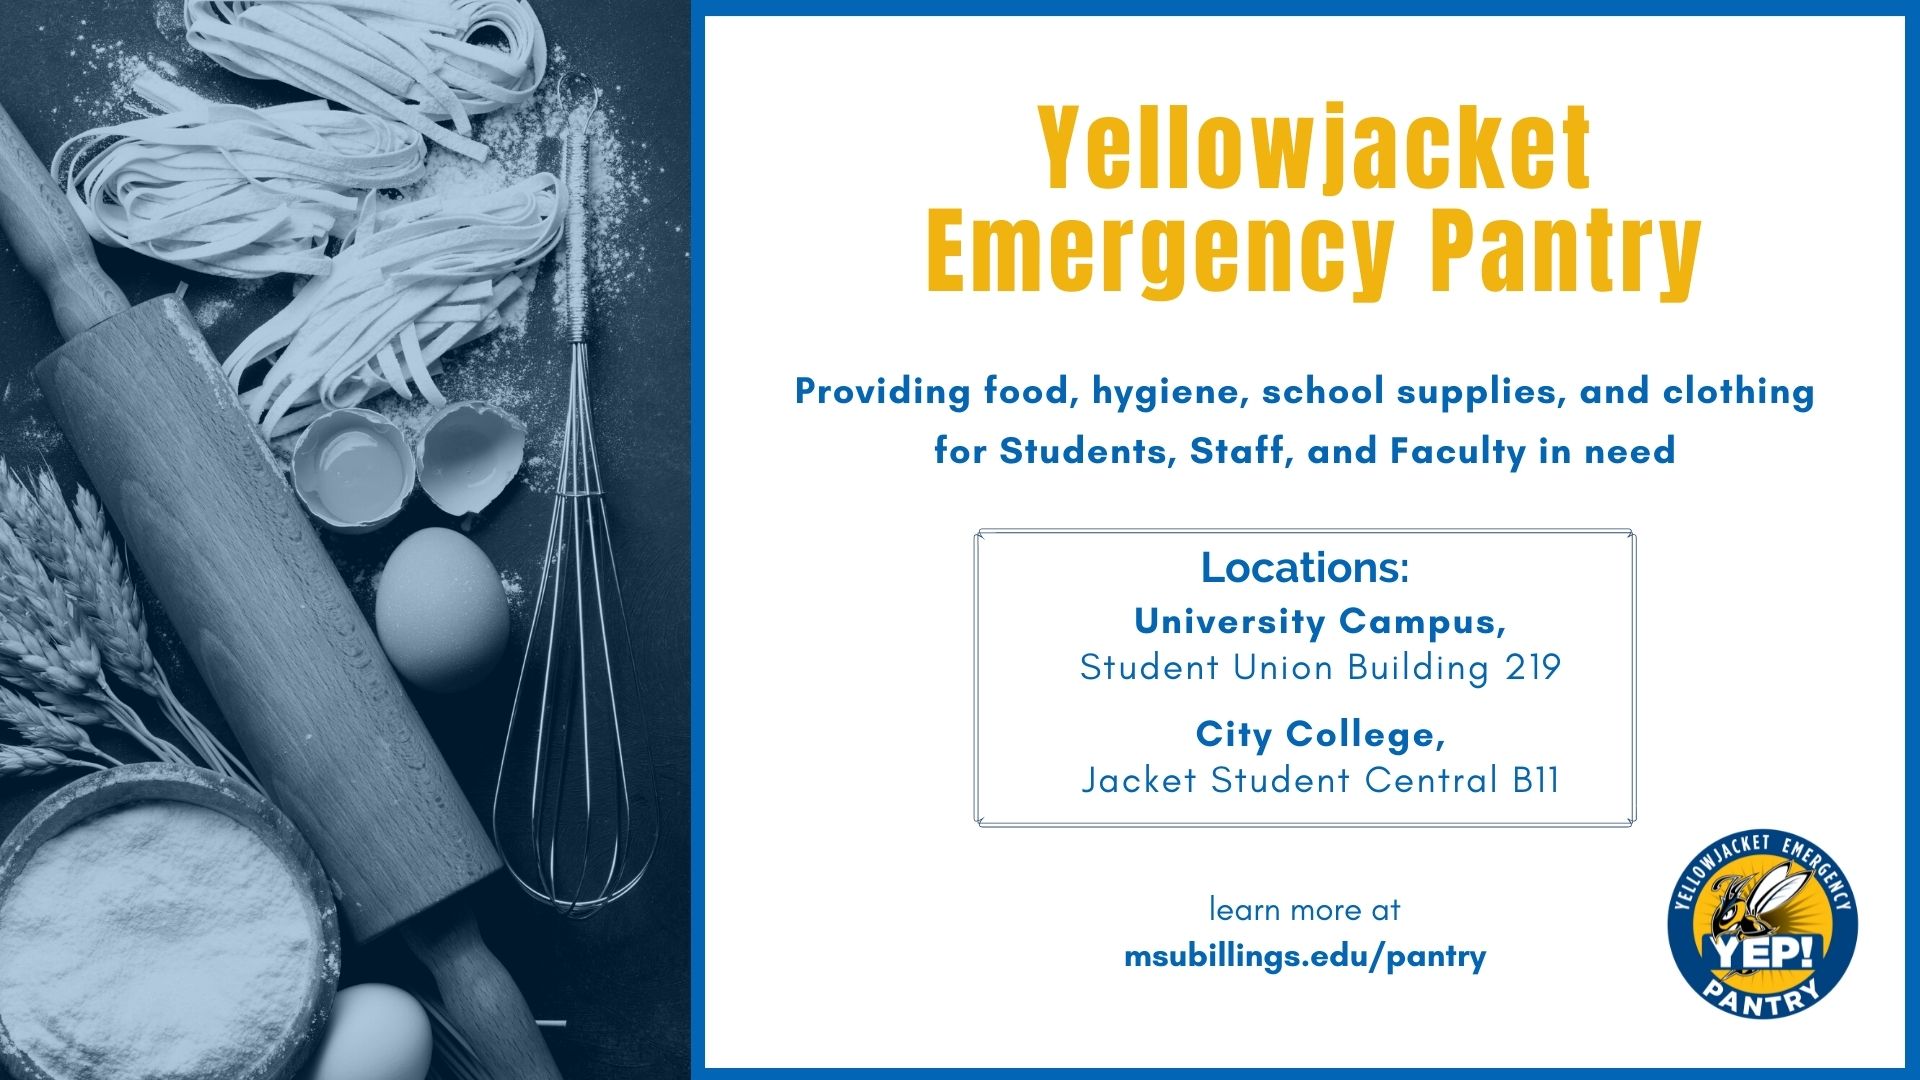 Yellowjacket Emergency Pantry - University Campus - Student Union Building 219, City College - Jacket Student Central B11